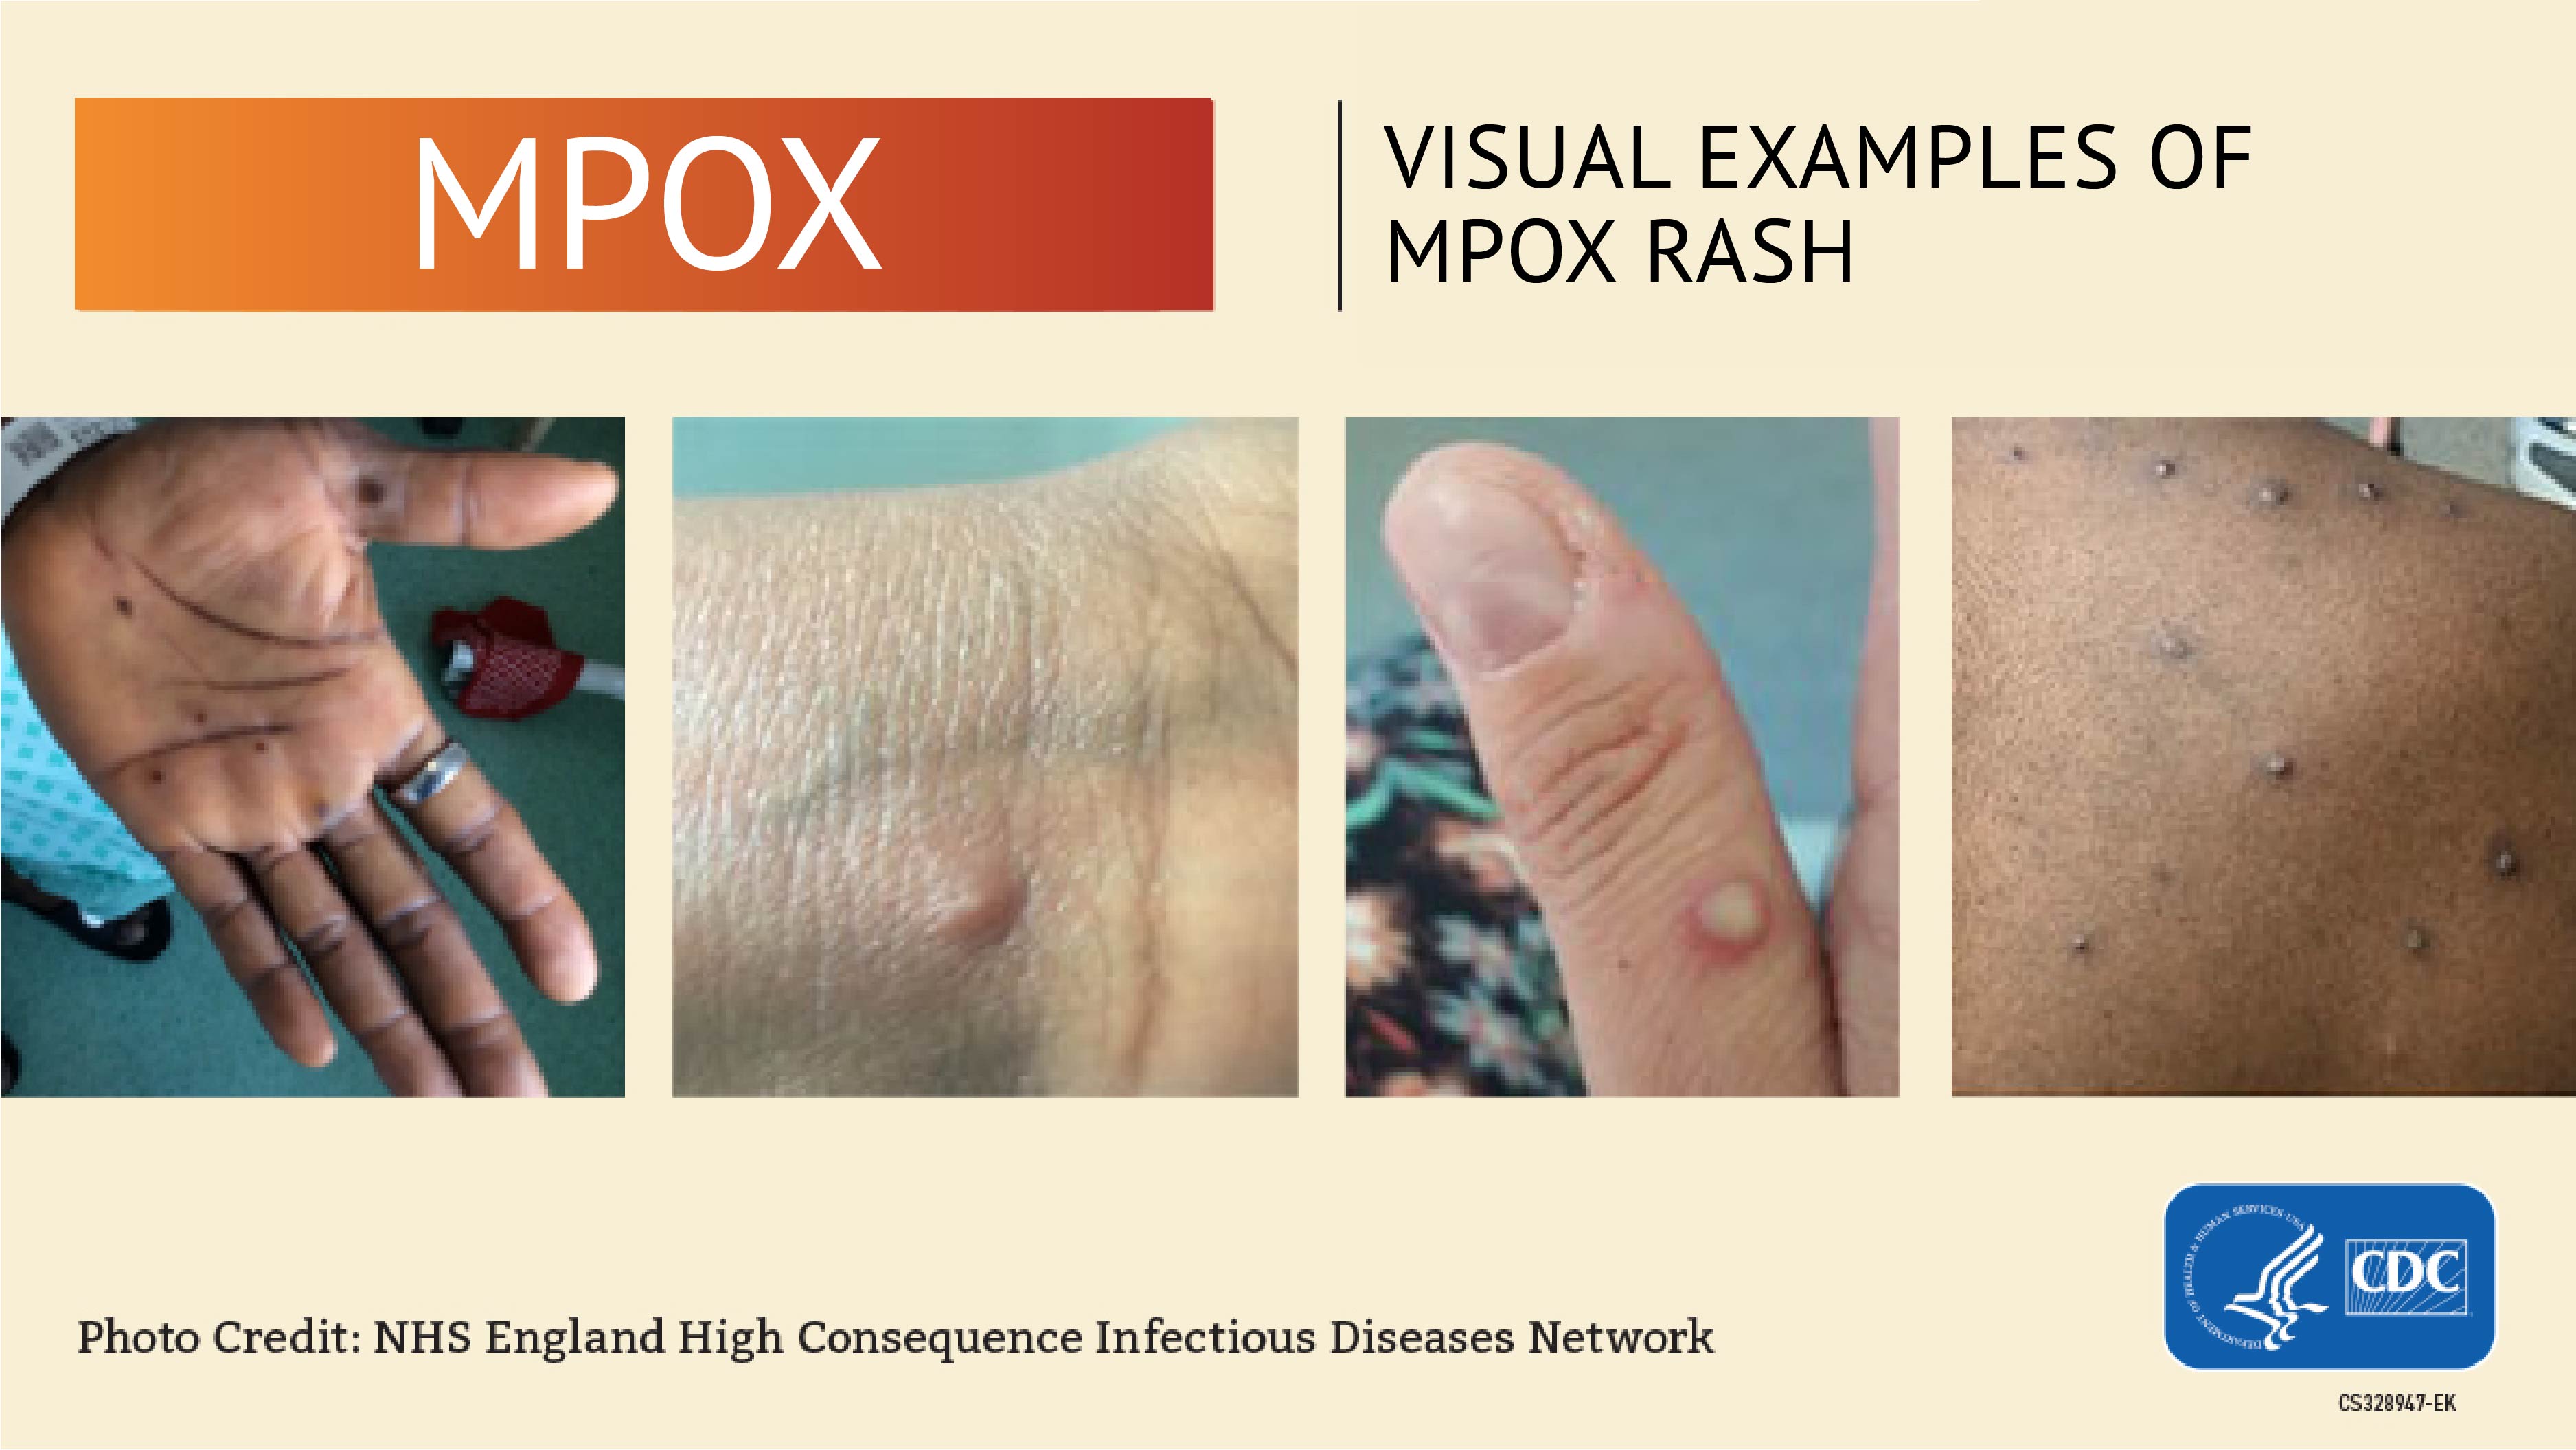 CDC: Visual examples of monkeypox rash. Photo credit: NHS England High Consequence Infectious Disease Network